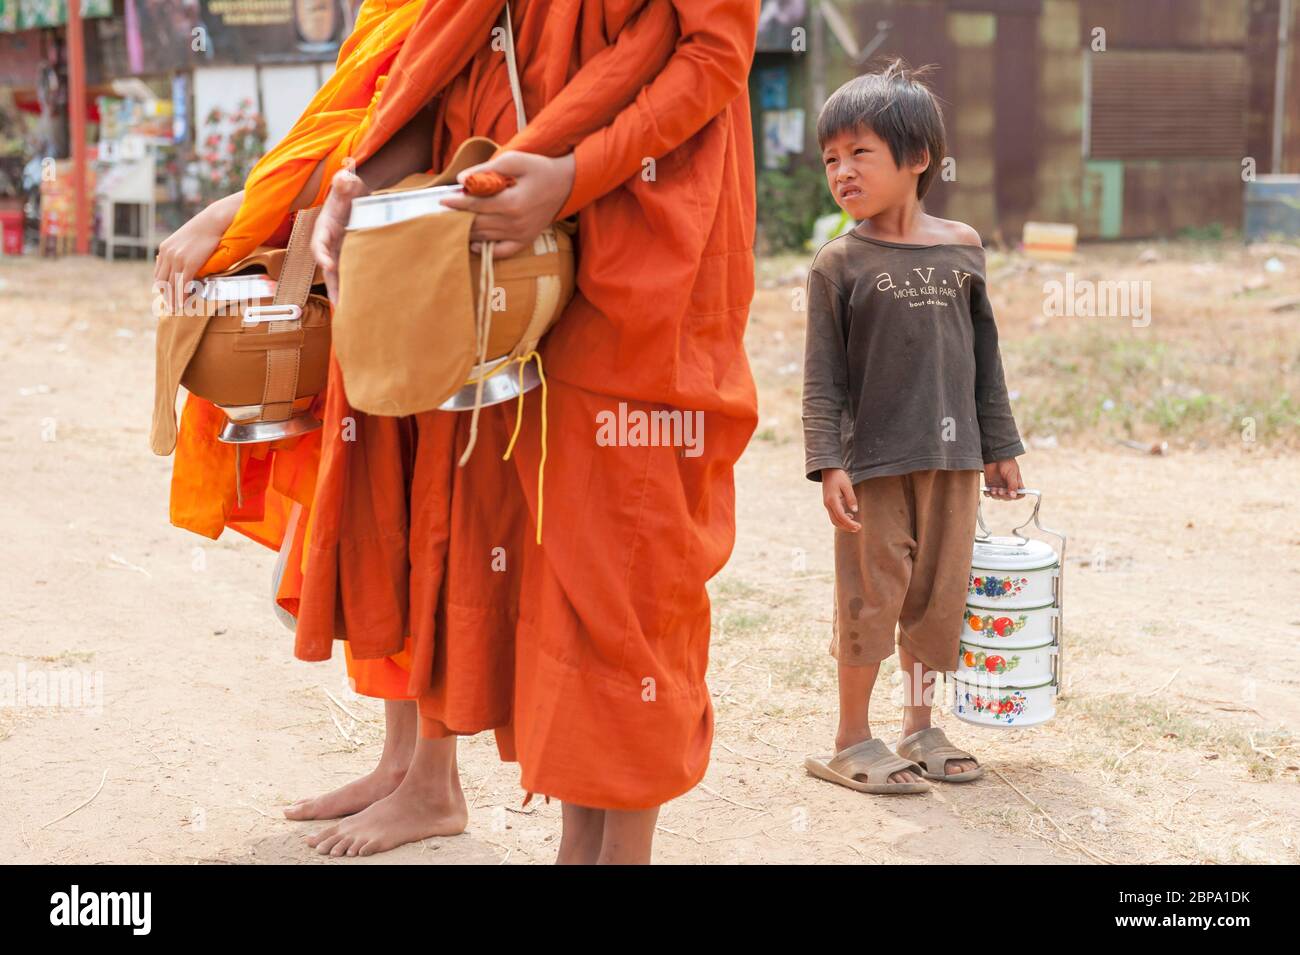 A young Cambodian boy looks on as buddist monks stop for almsgiving. Central Cambodia, Southeast Asia Stock Photo